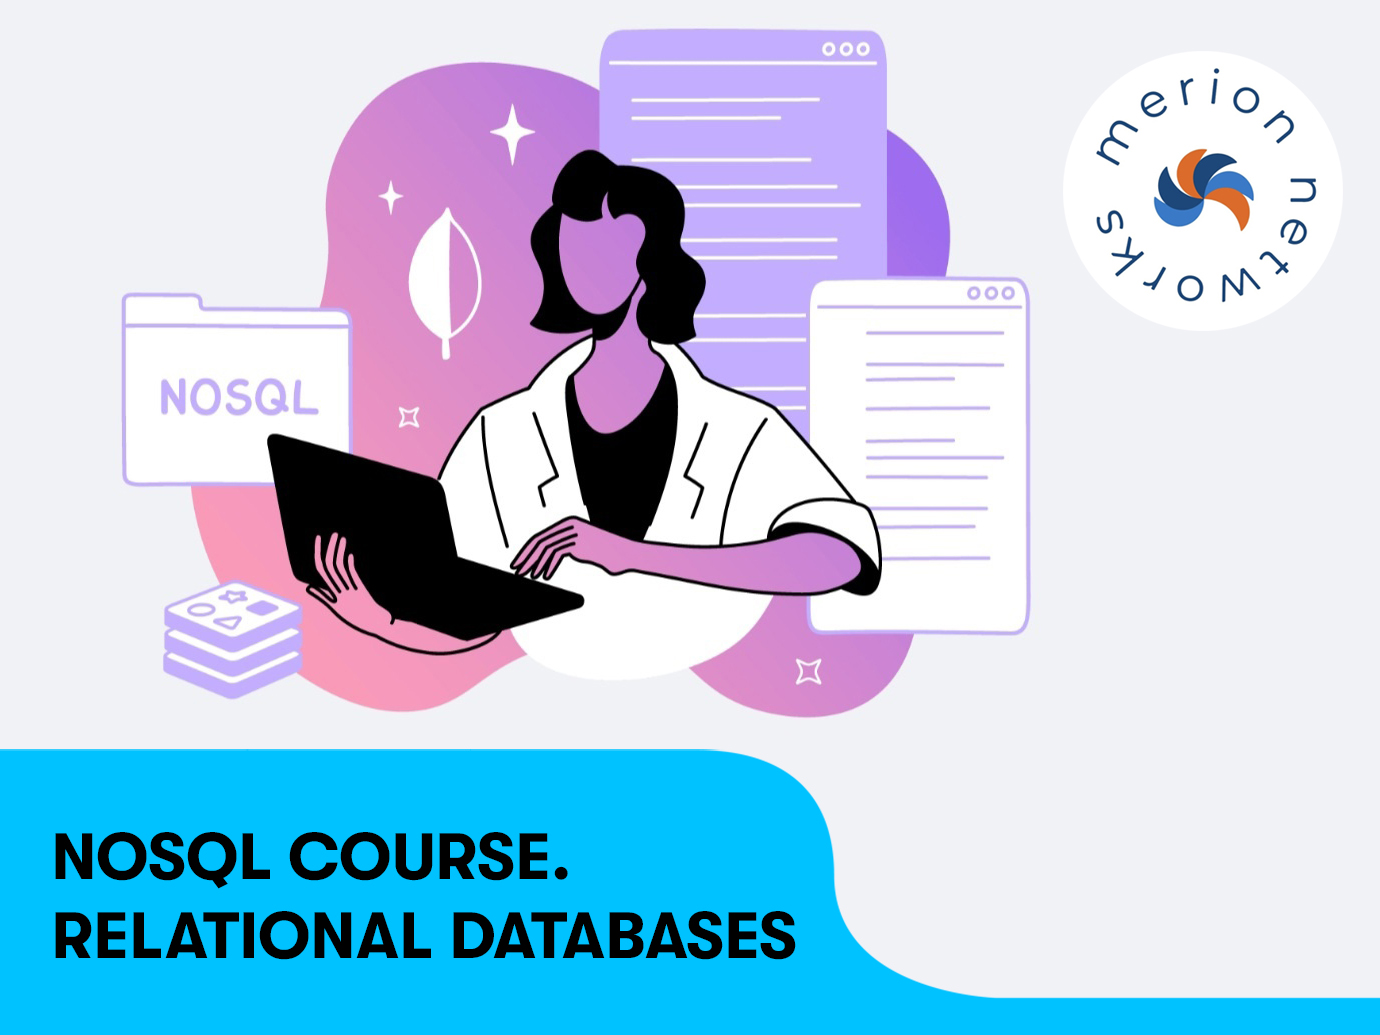 NoSQL course. Relational databases